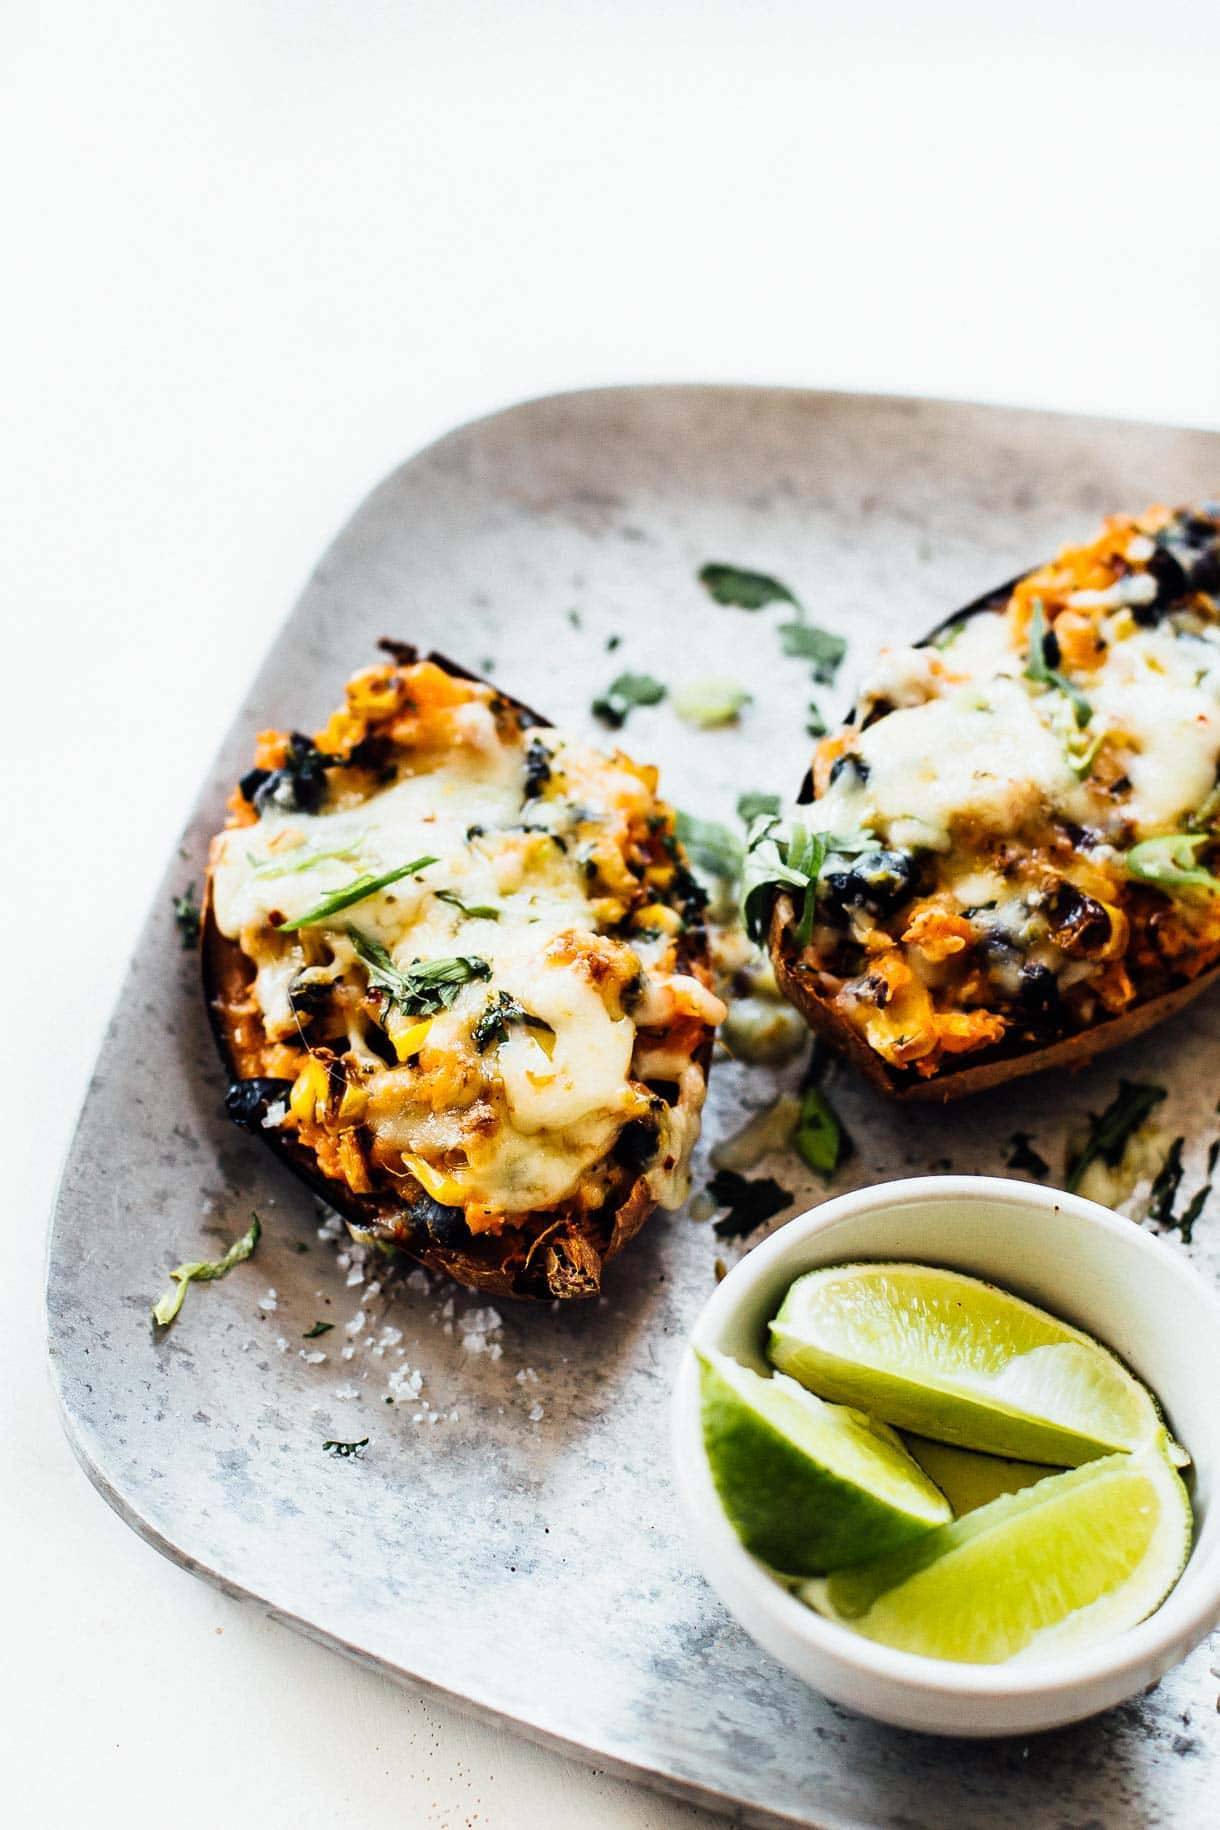 Chipotle sweet potato skins on a plate.